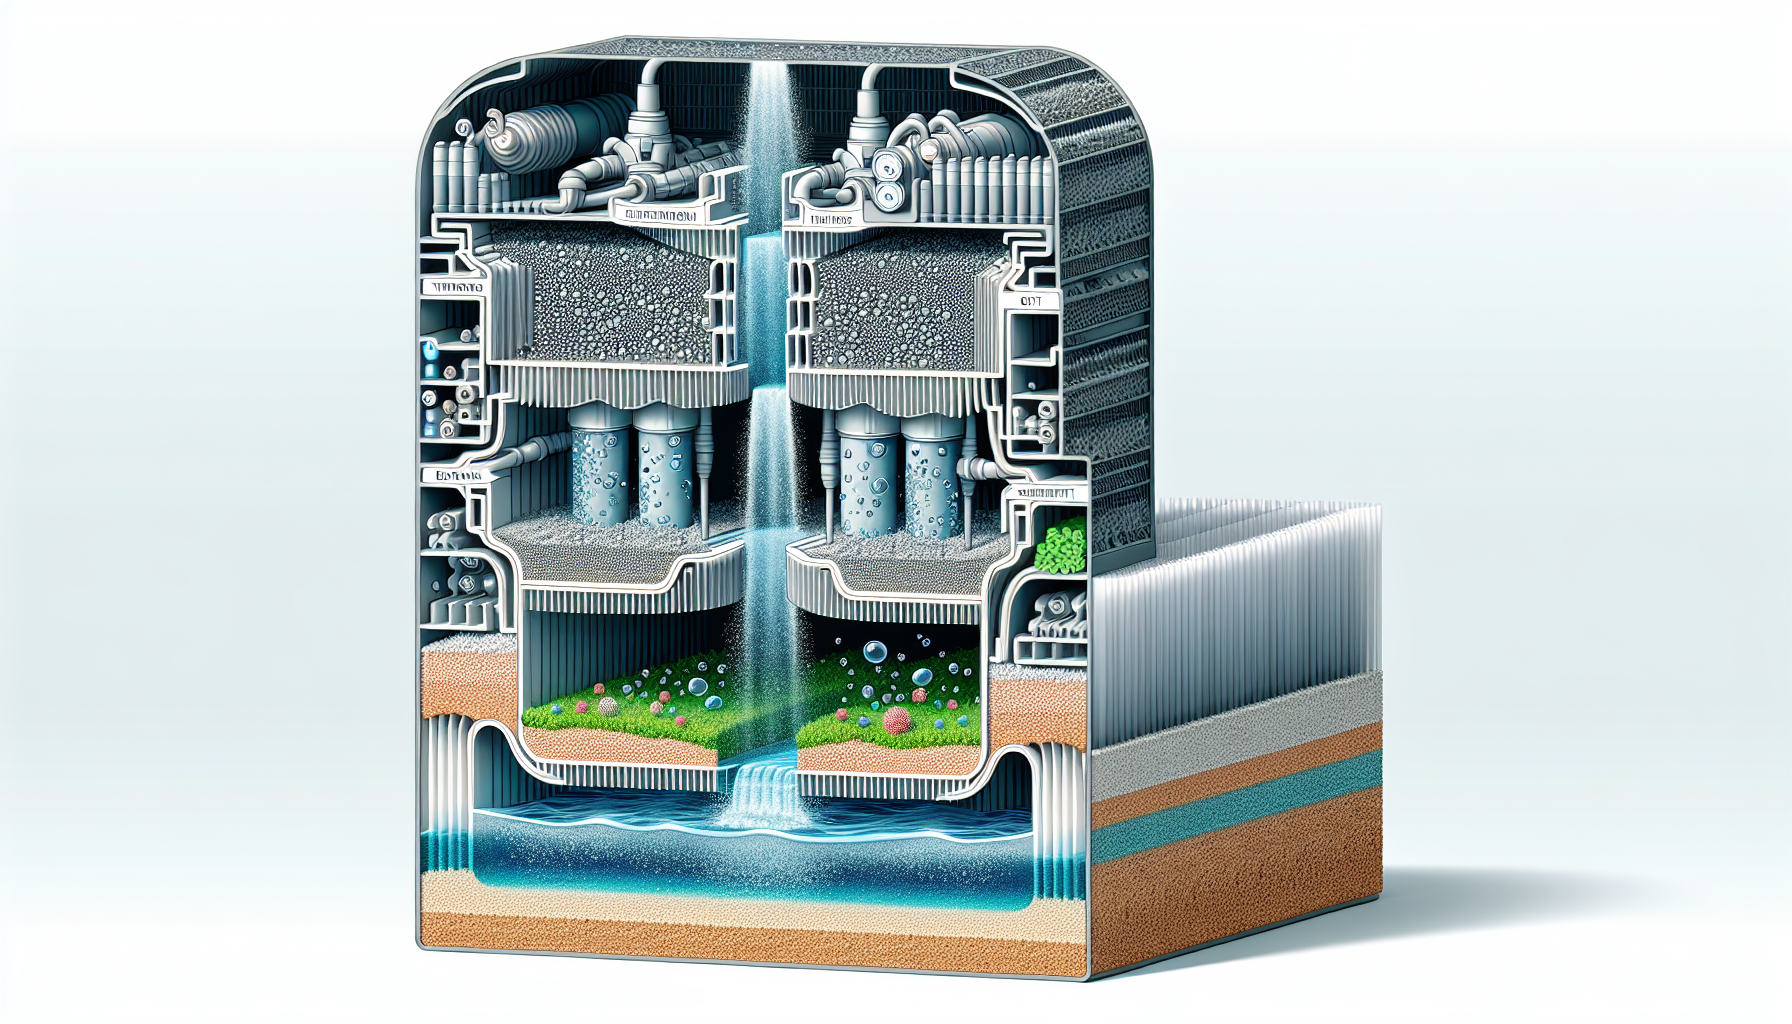 Illustration of advanced filtration technology in Puretec Hybrid P3